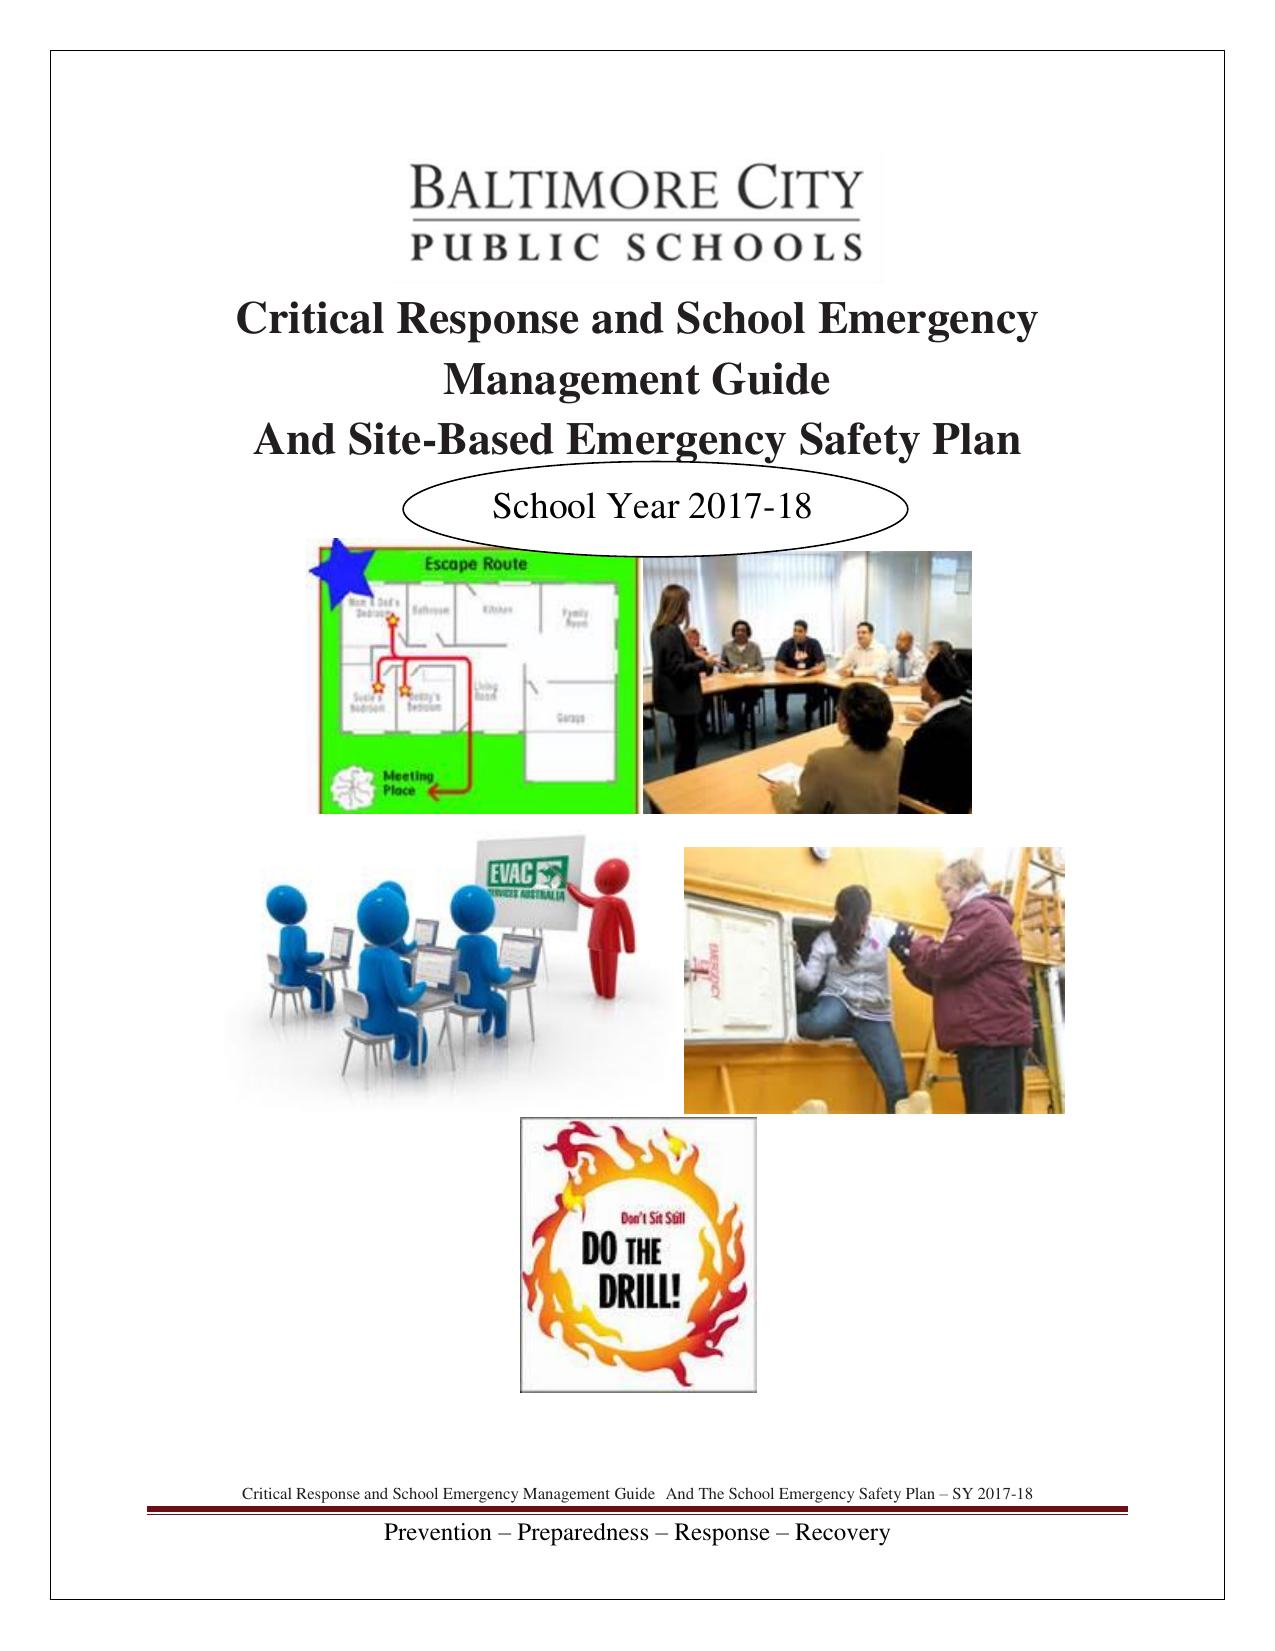 Critical Response and School Emergency Management Guide And Site-Based Emergency Safety Plan 2017